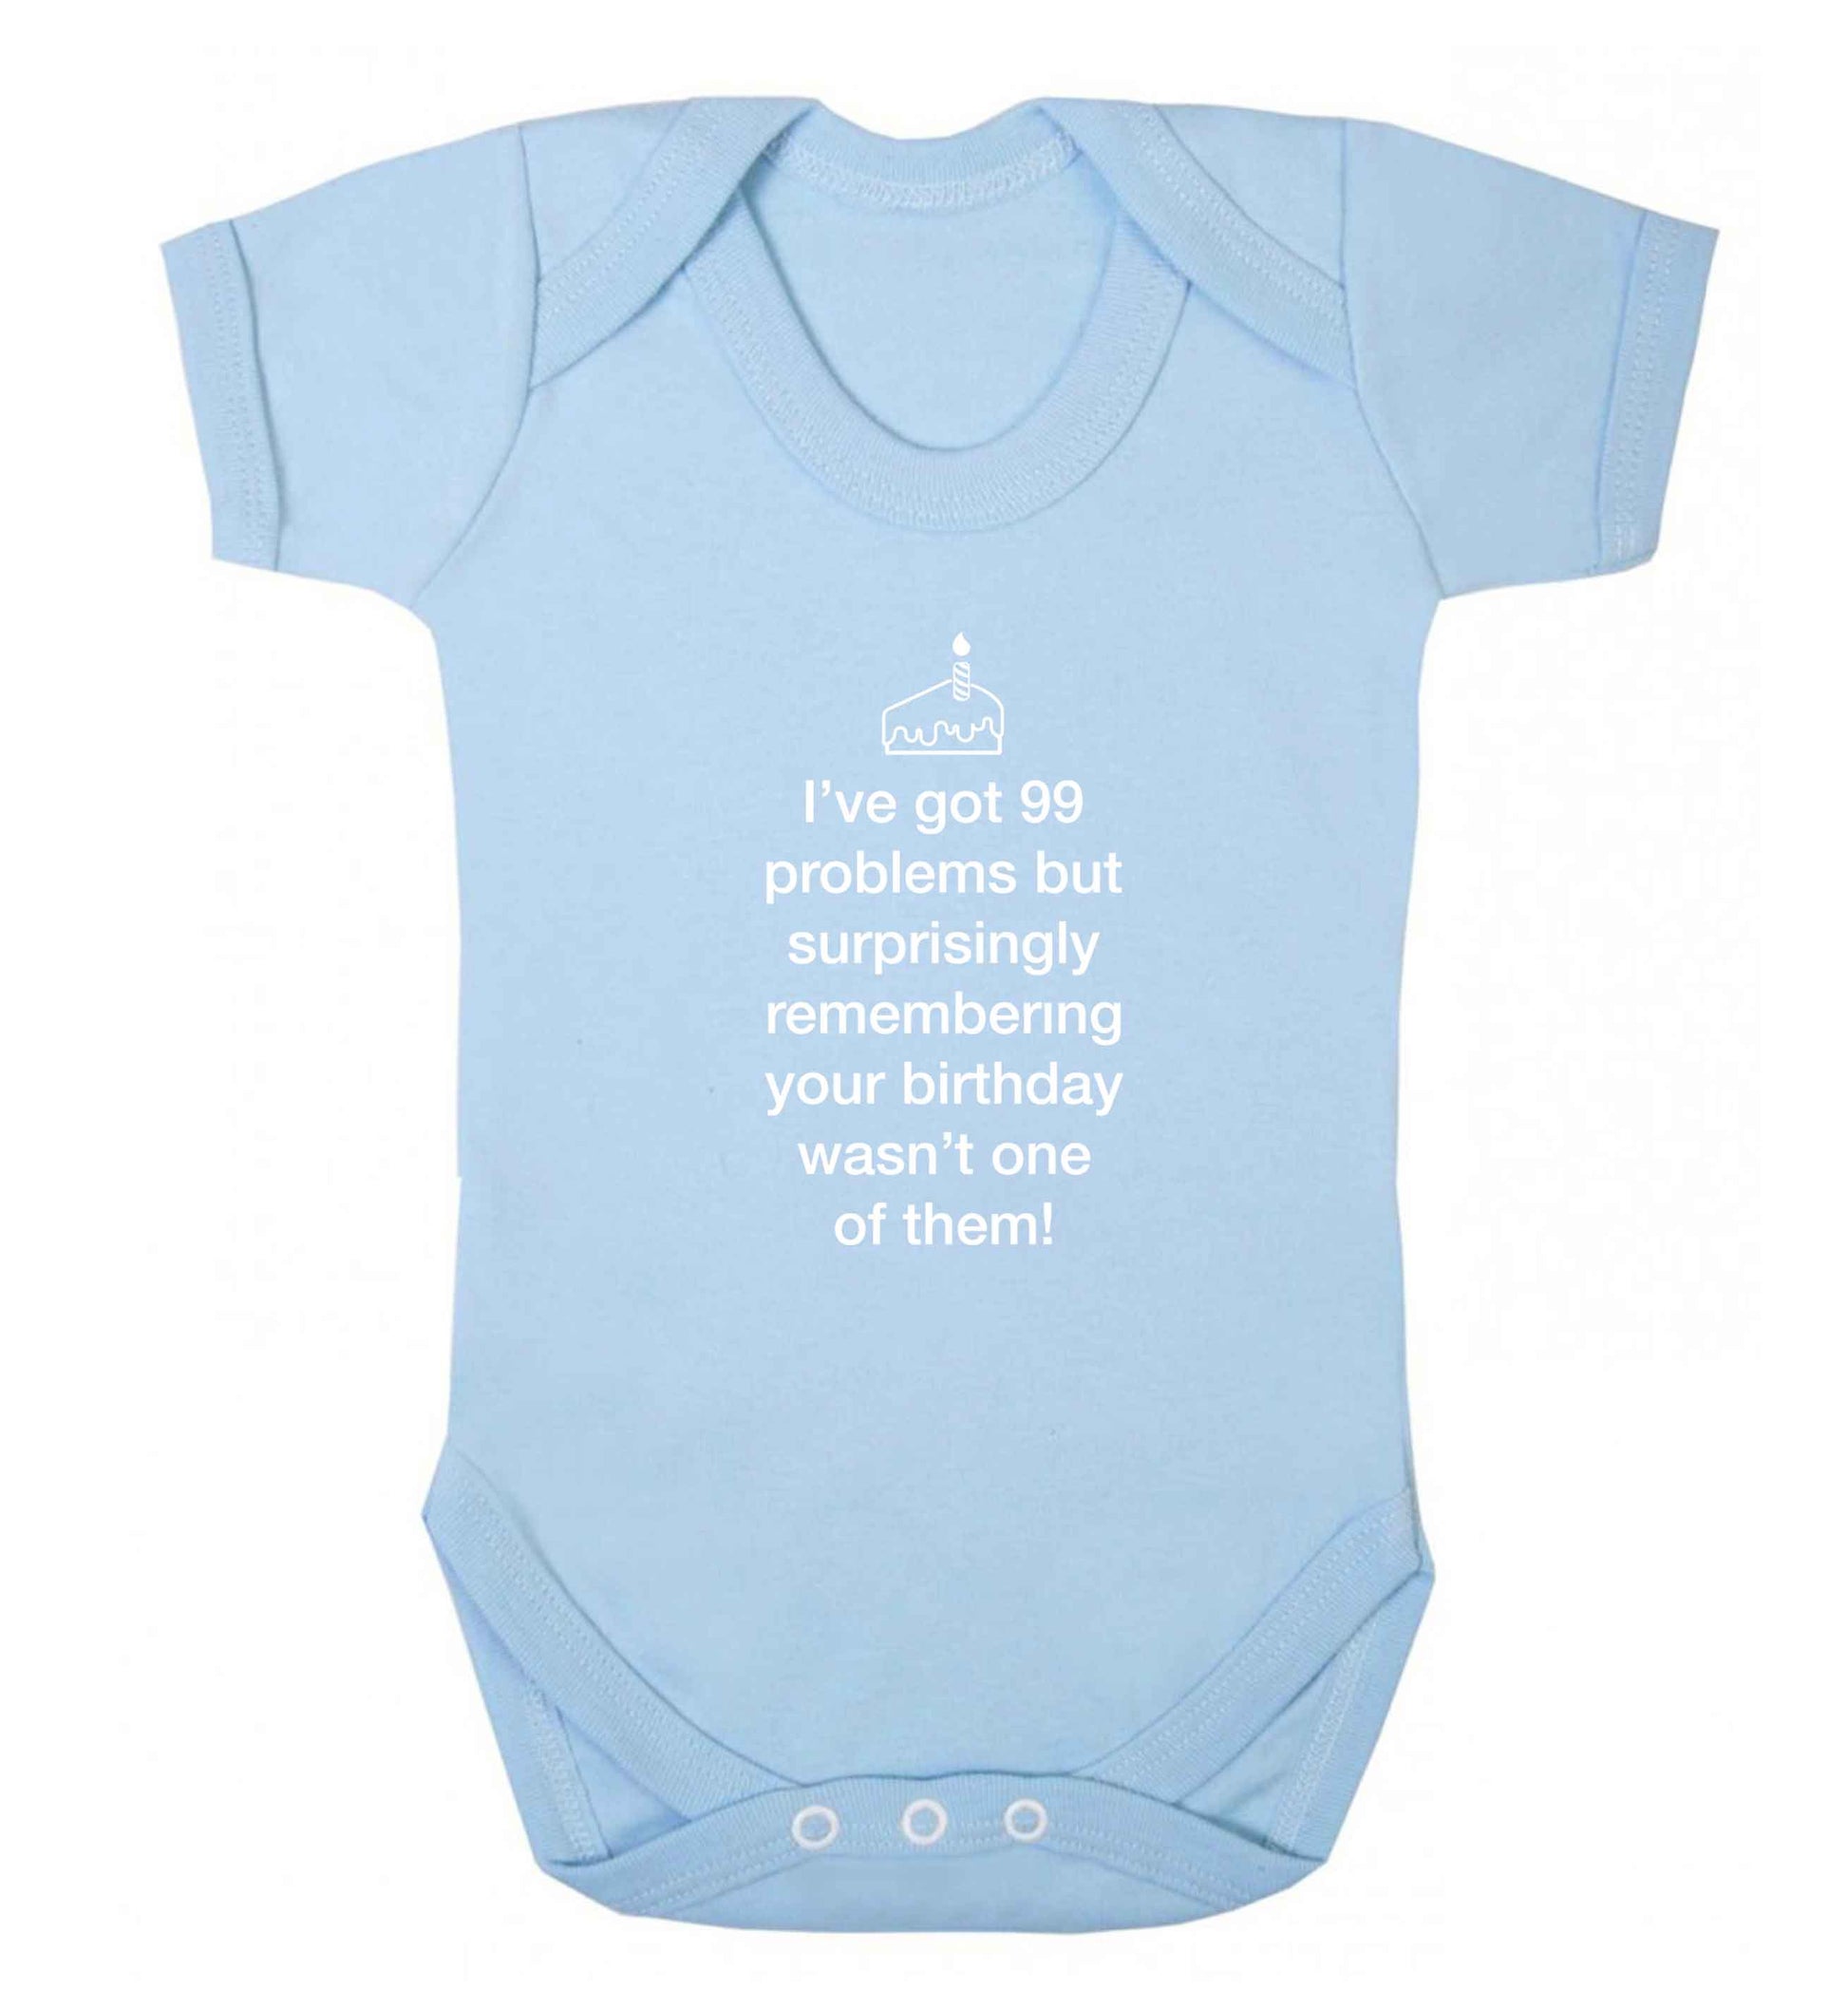 I've got 99 problems but surprisingly remembering your birthday wasn't one of them! baby vest pale blue 18-24 months